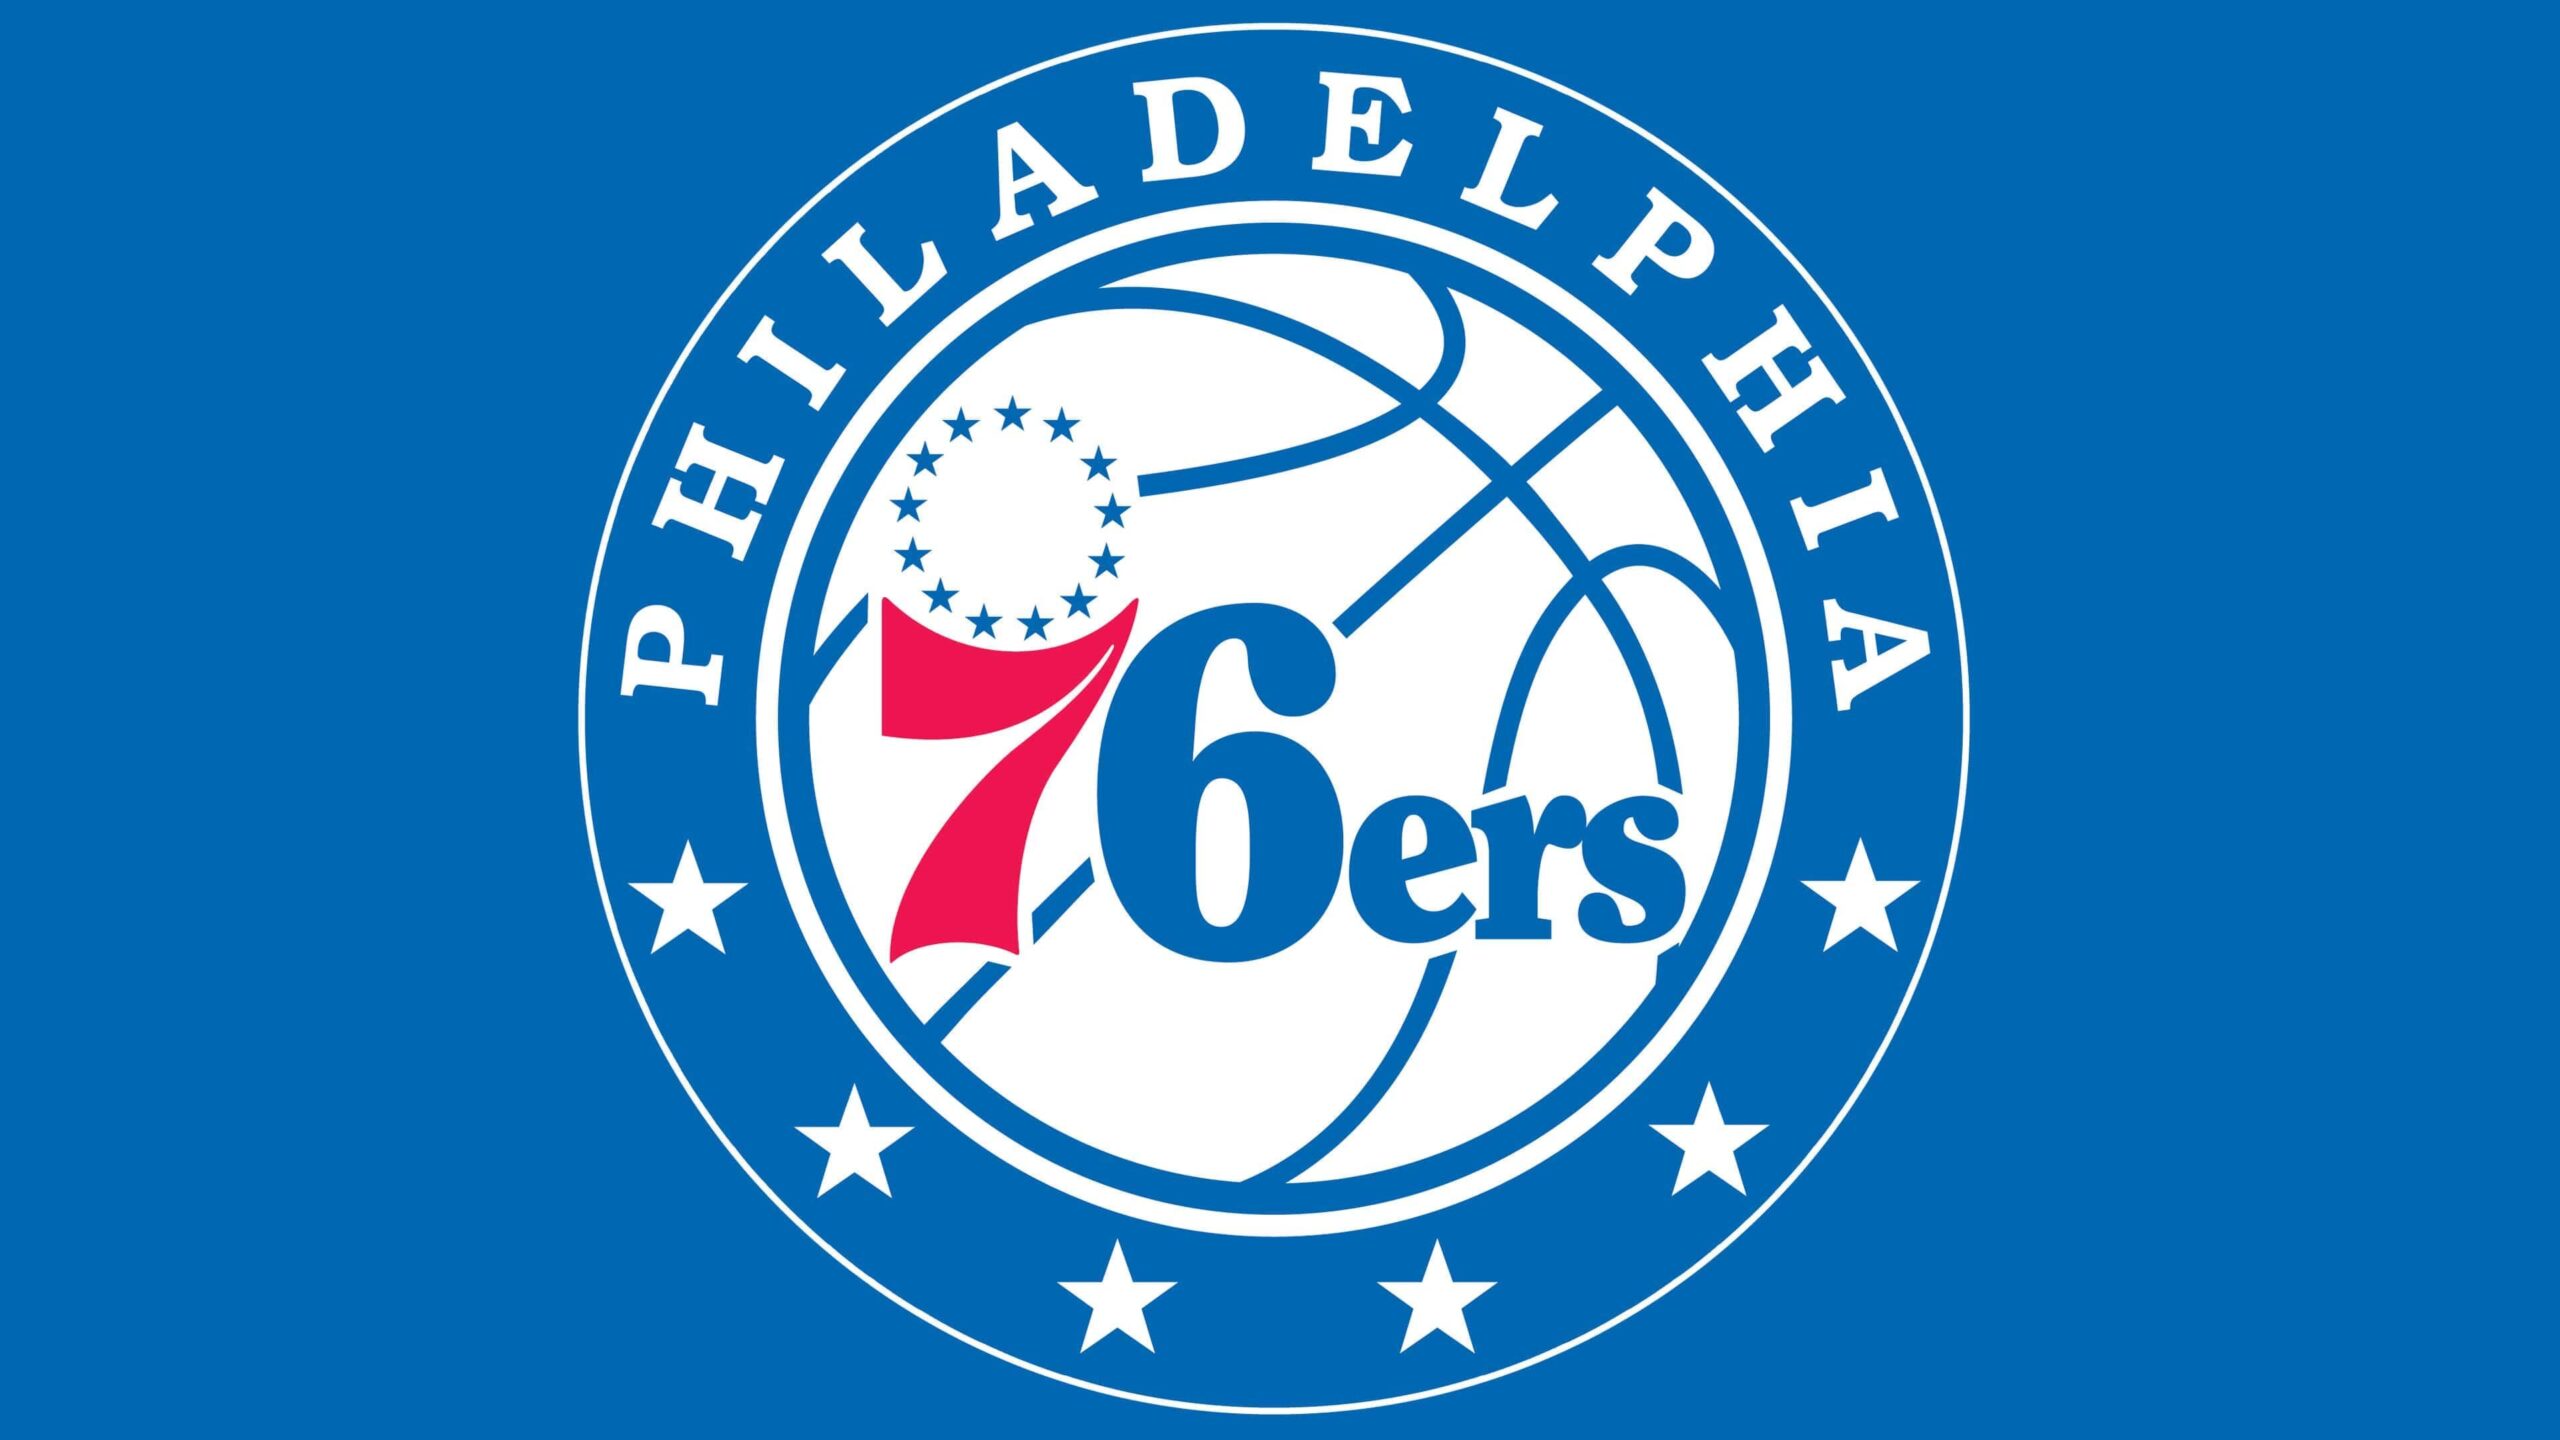 ESPN: I just need time for myself, a former Kansas star reject a new NBA contract with the Philadelphia 76ers.